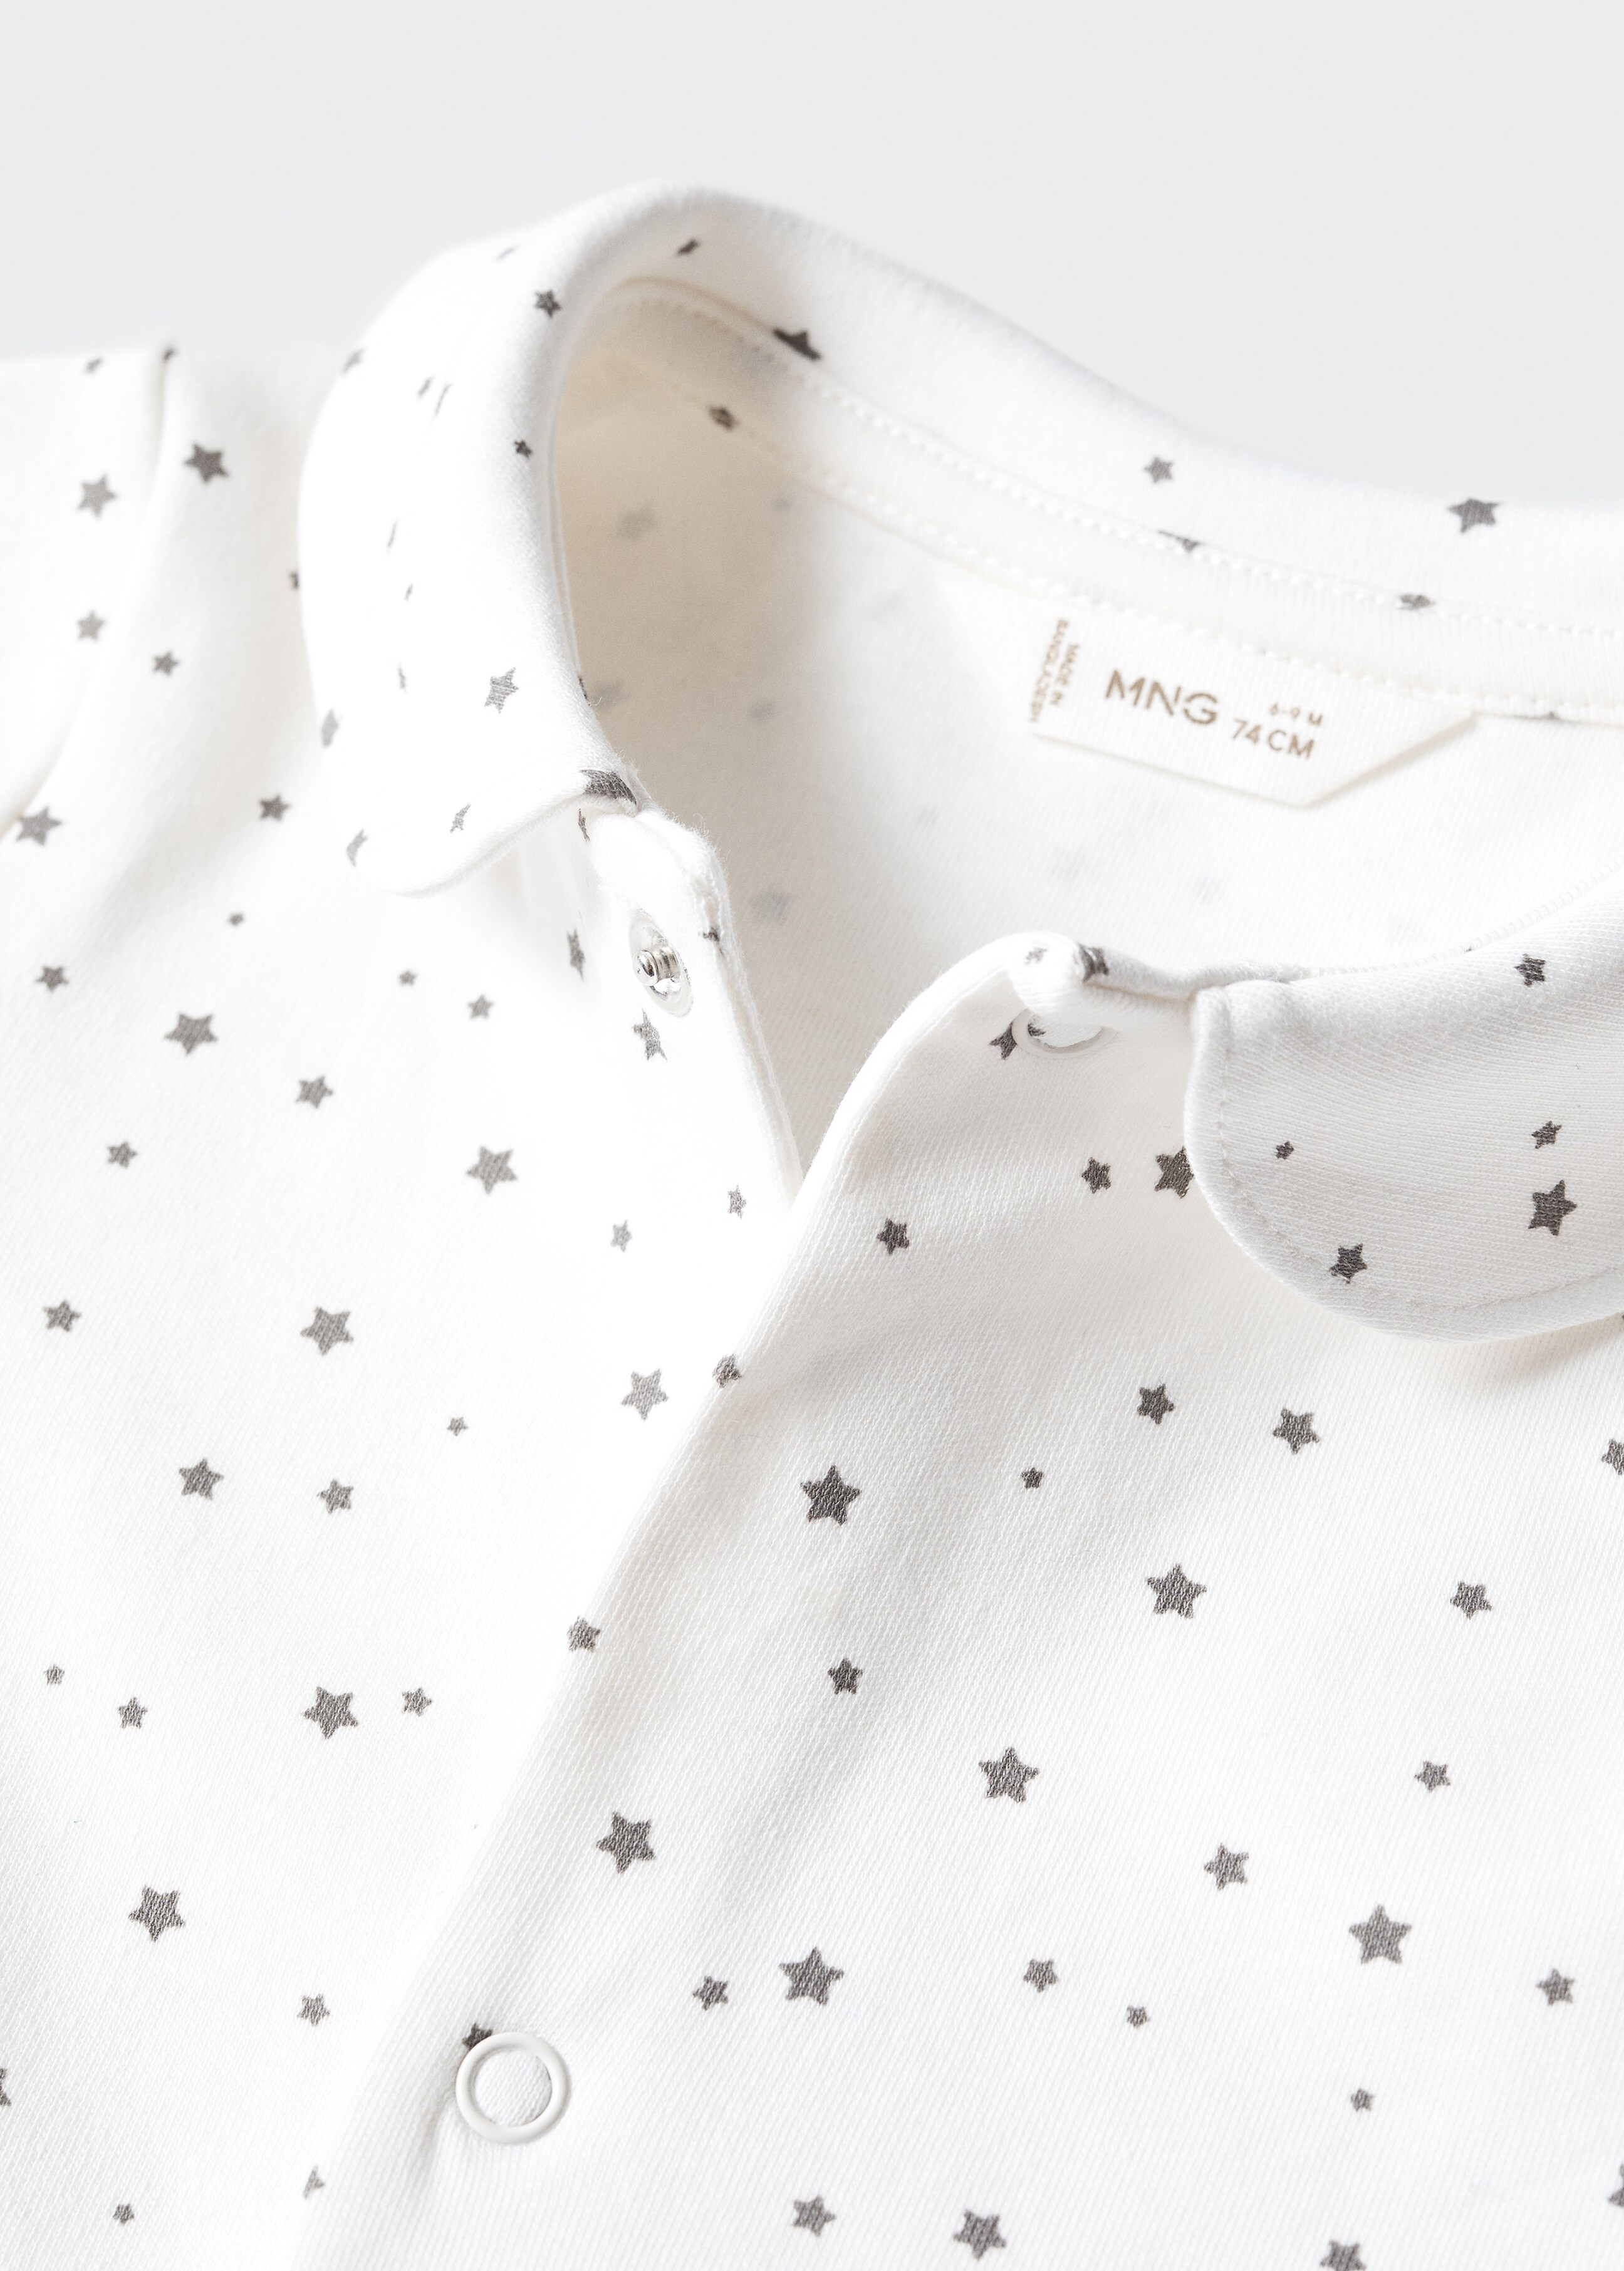 Star body pyjamas - Details of the article 0